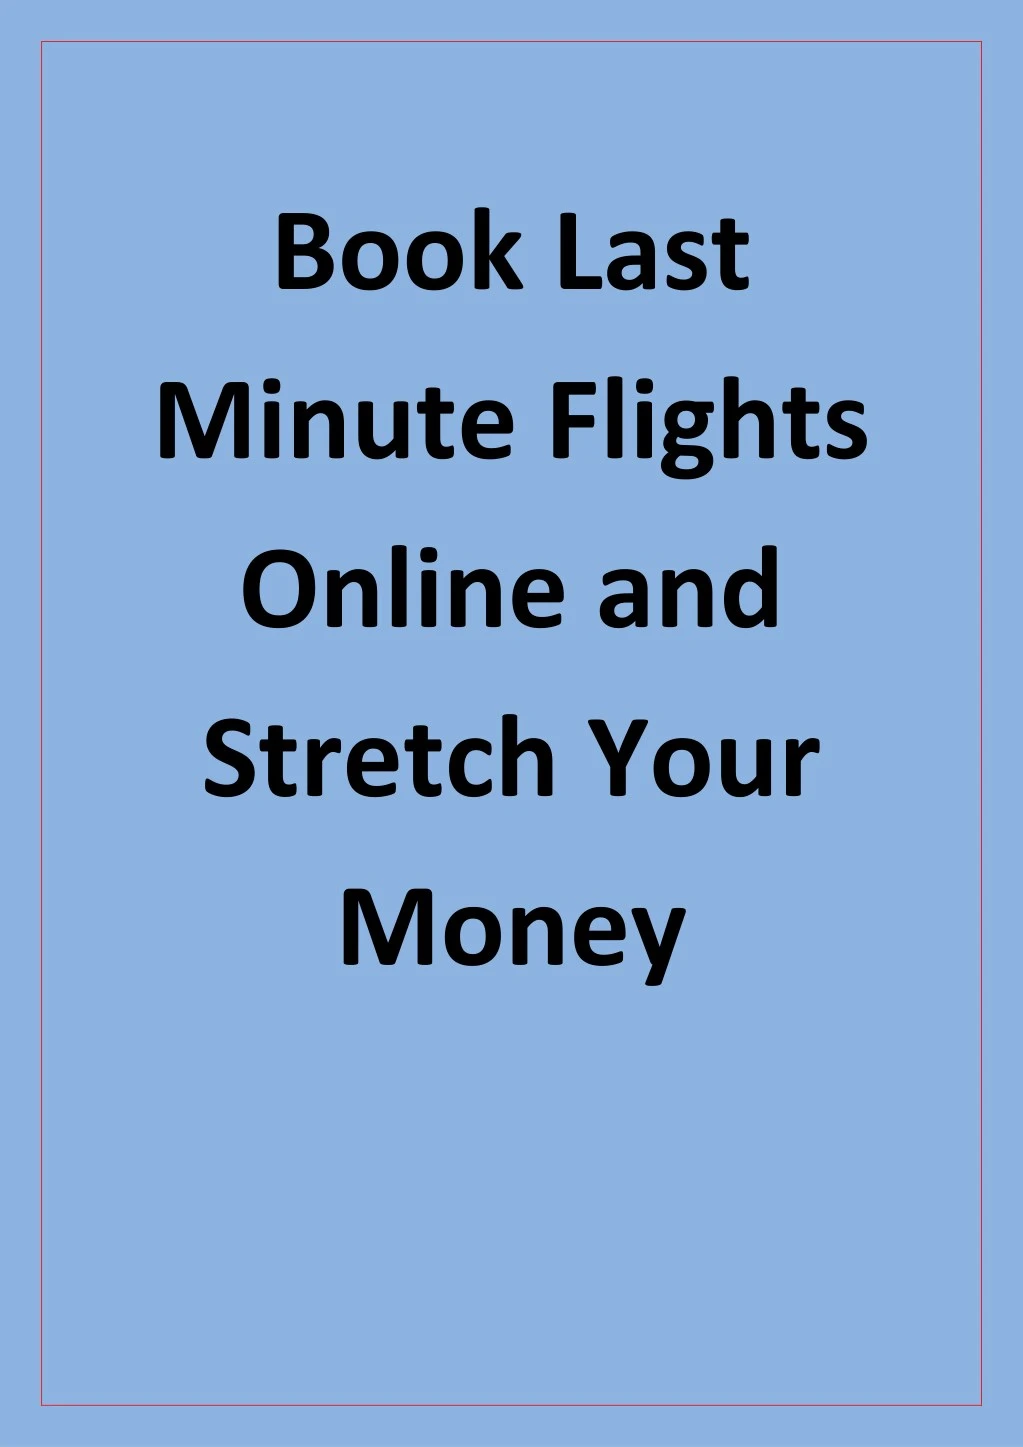 book last minute flights online and stretch your